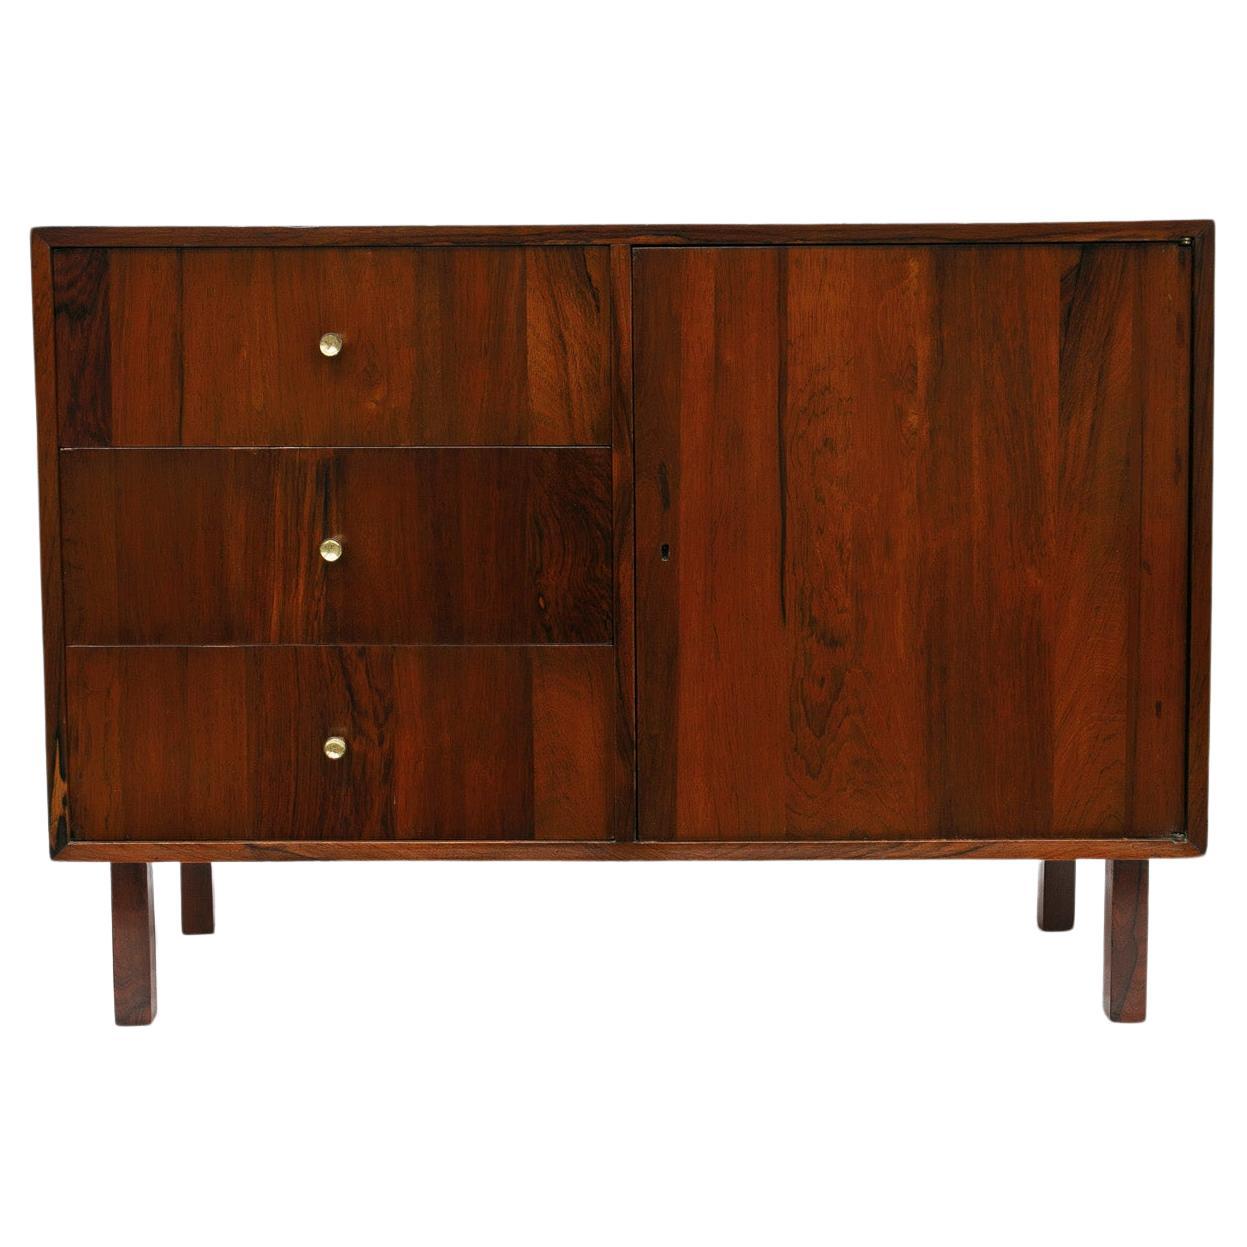 Available today, this Mid-Century Modern chest of drawers made in Hardwood designed by Geraldo de Barros for Unilabor in the fifties is a very rare FIND and is gorgeous!

The chest is entirely made in Brazilian Rosewood, known as Jacaranda and